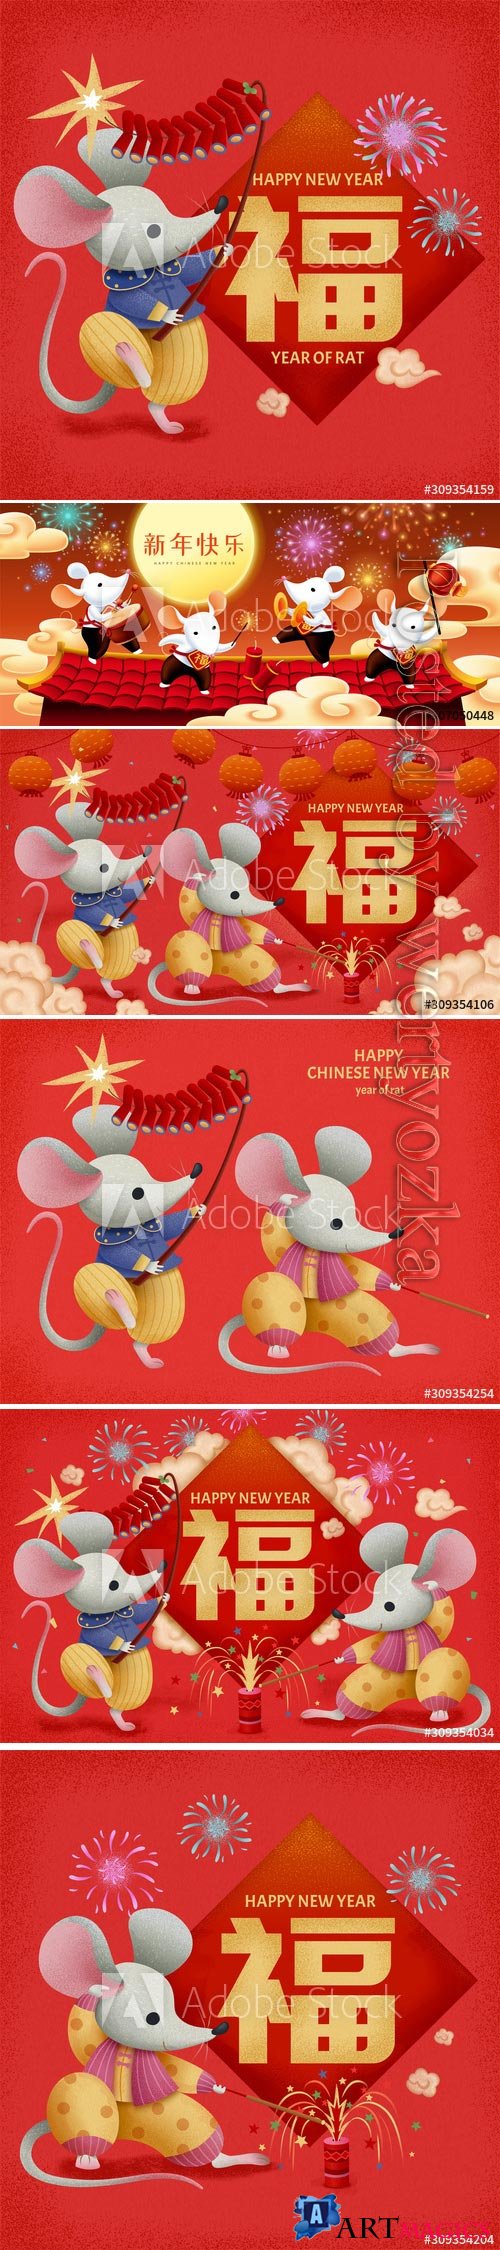 Mice lit firecrackers for new year vector design